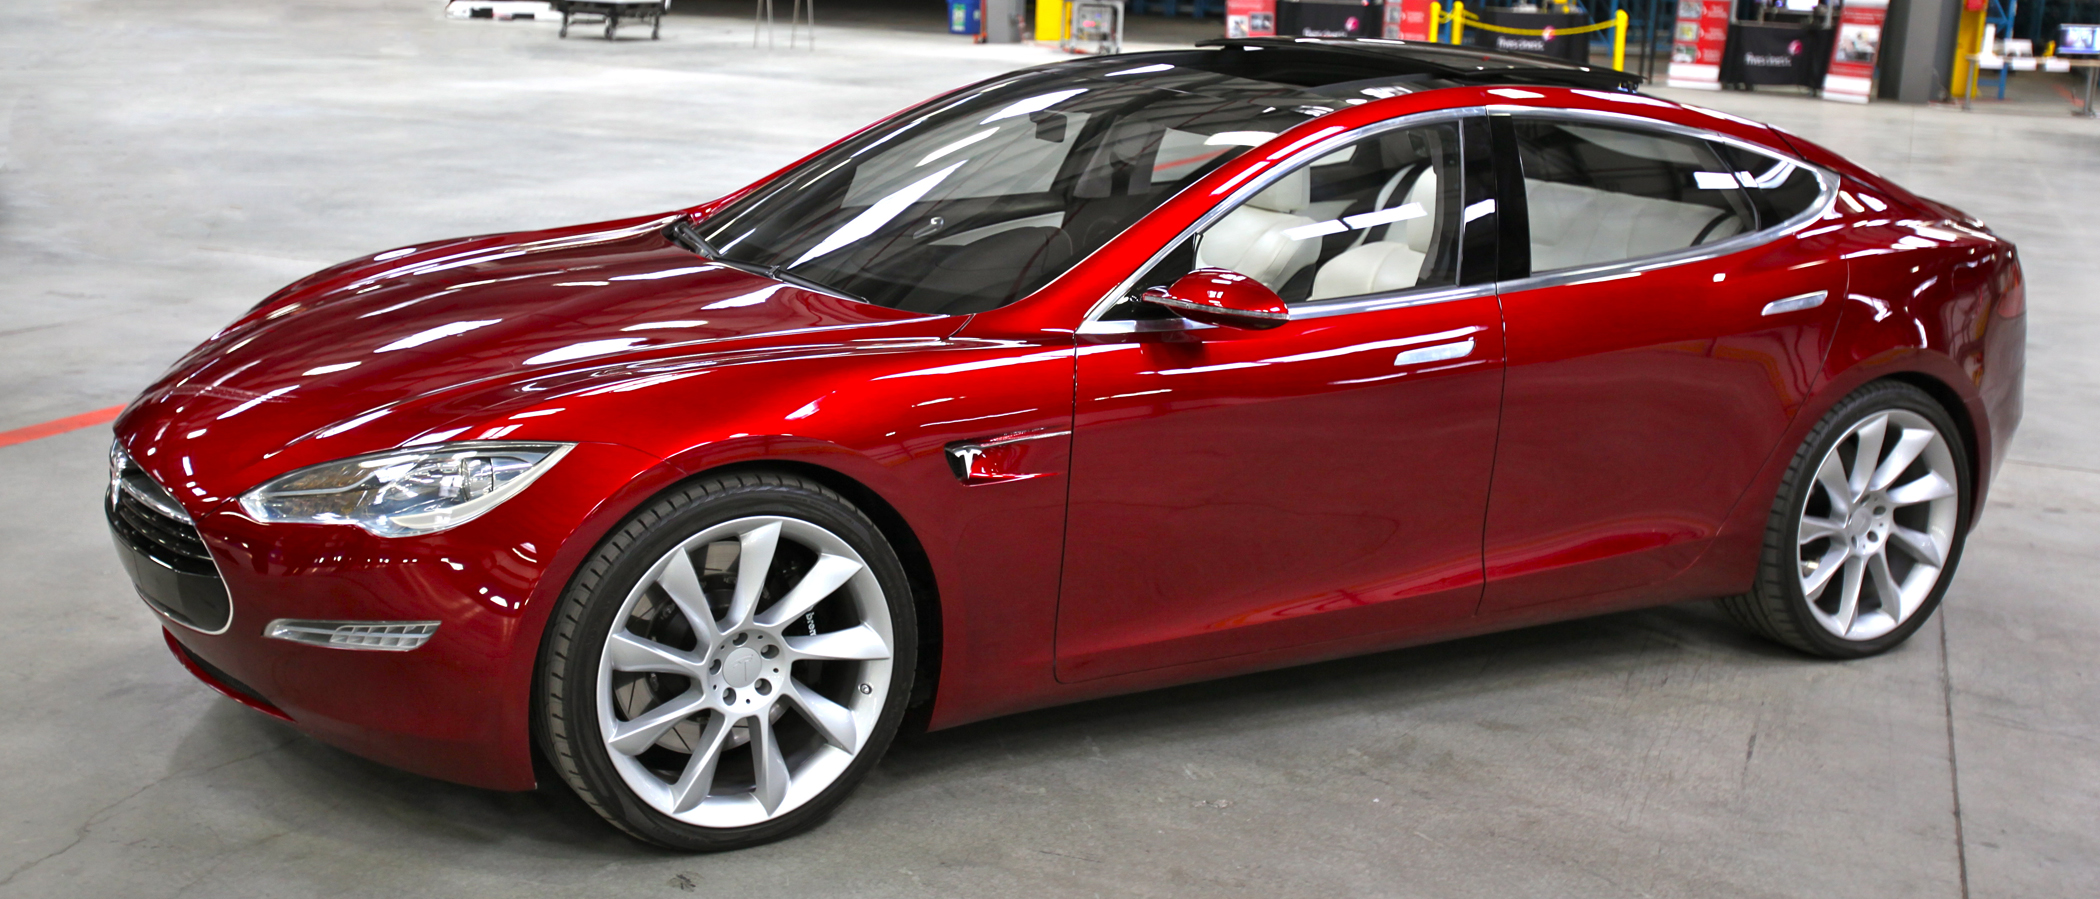 Is Tesla Missing Out on the Auto Industry Boom?